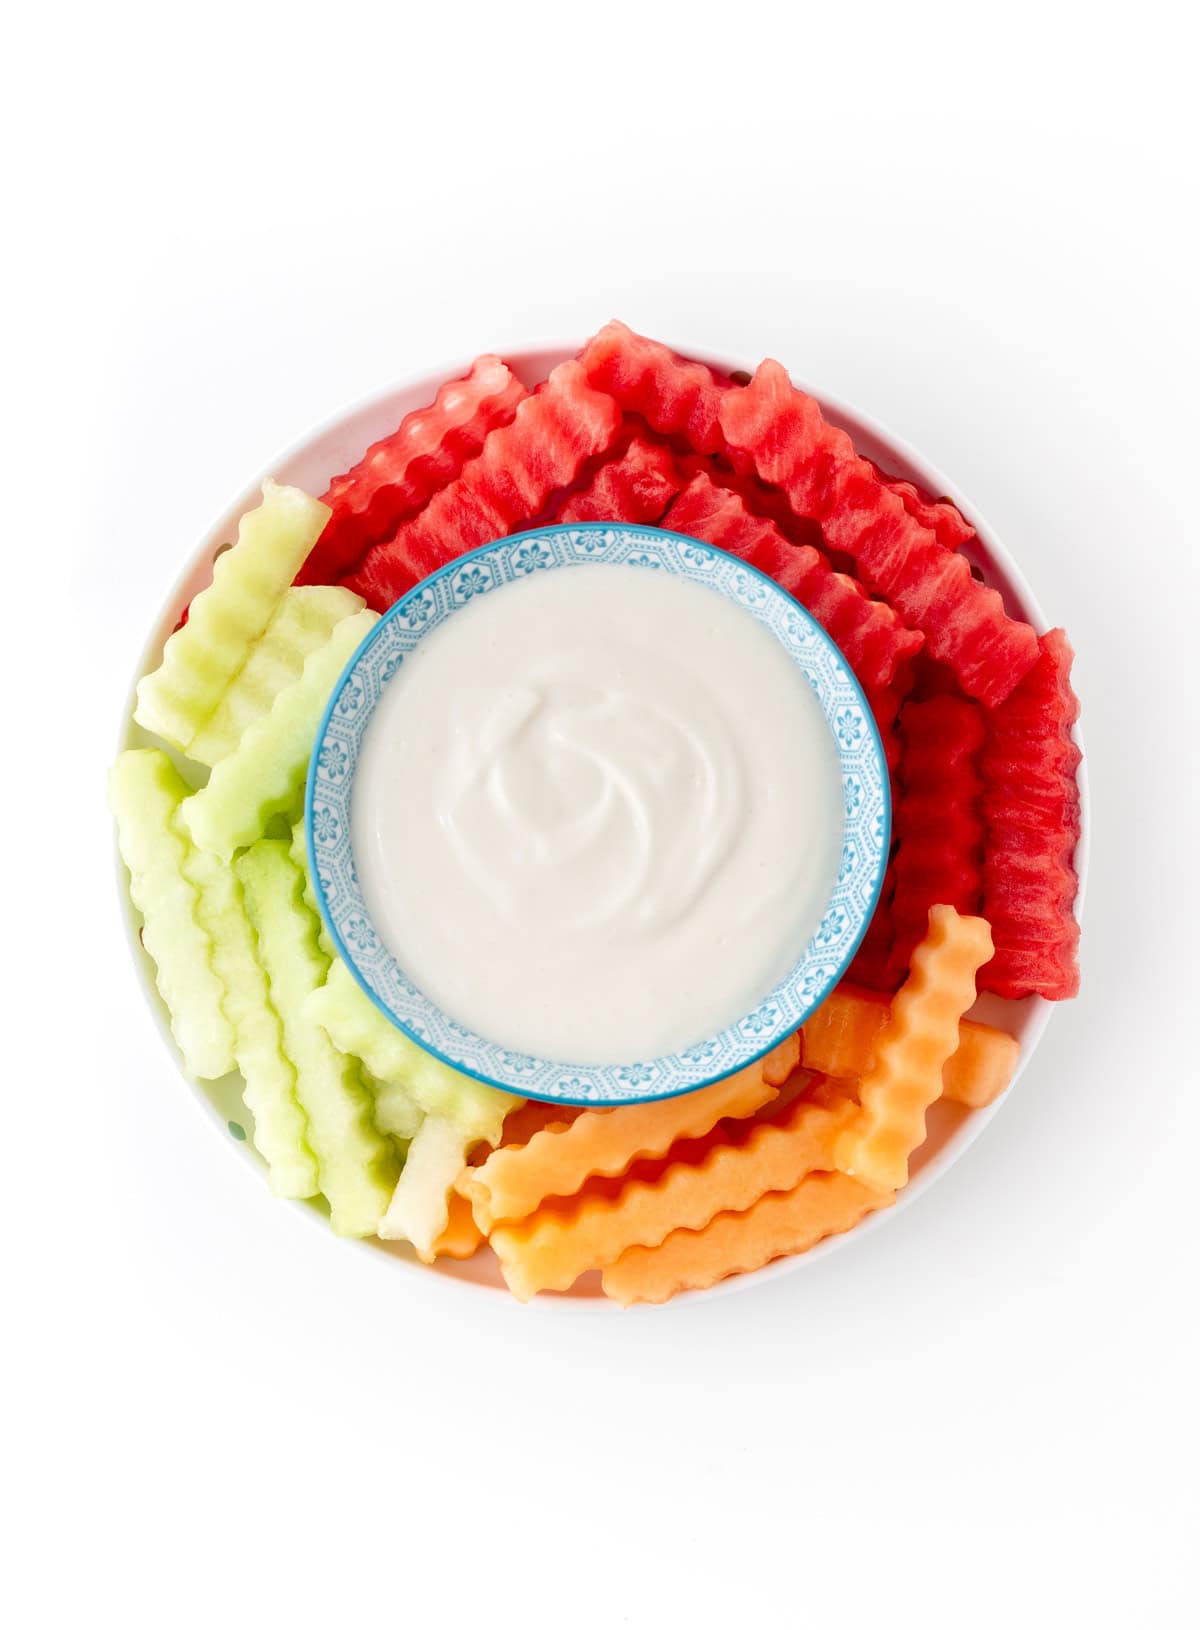 Fruit fries on a platter with a bowl of fruit dip in the middle.